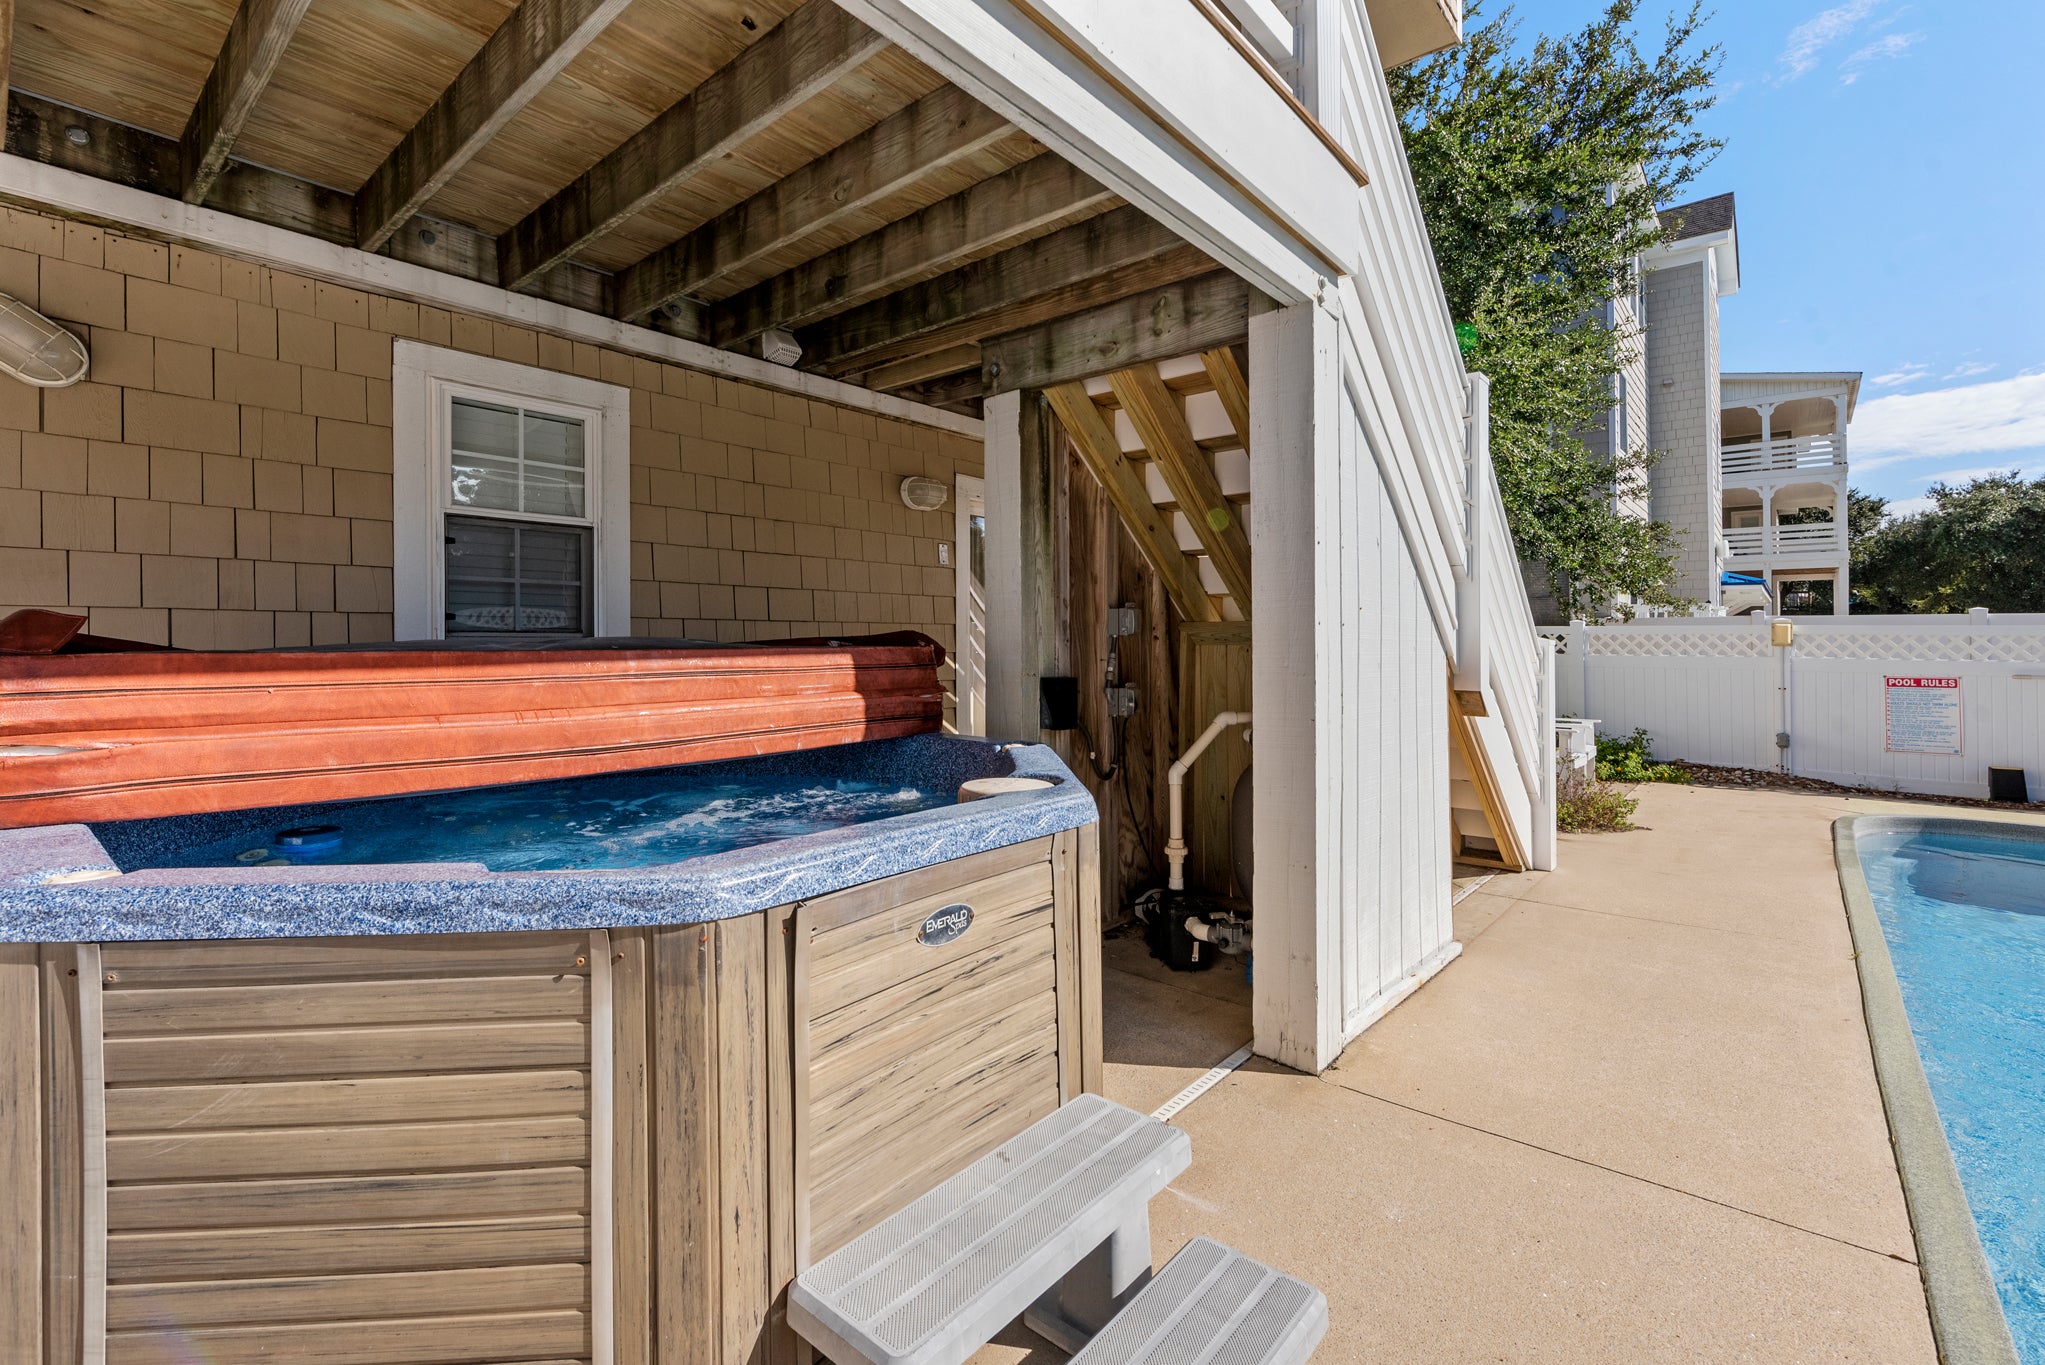 JR4228: Pirate's Booty | Pool Area w/ Hot Tub